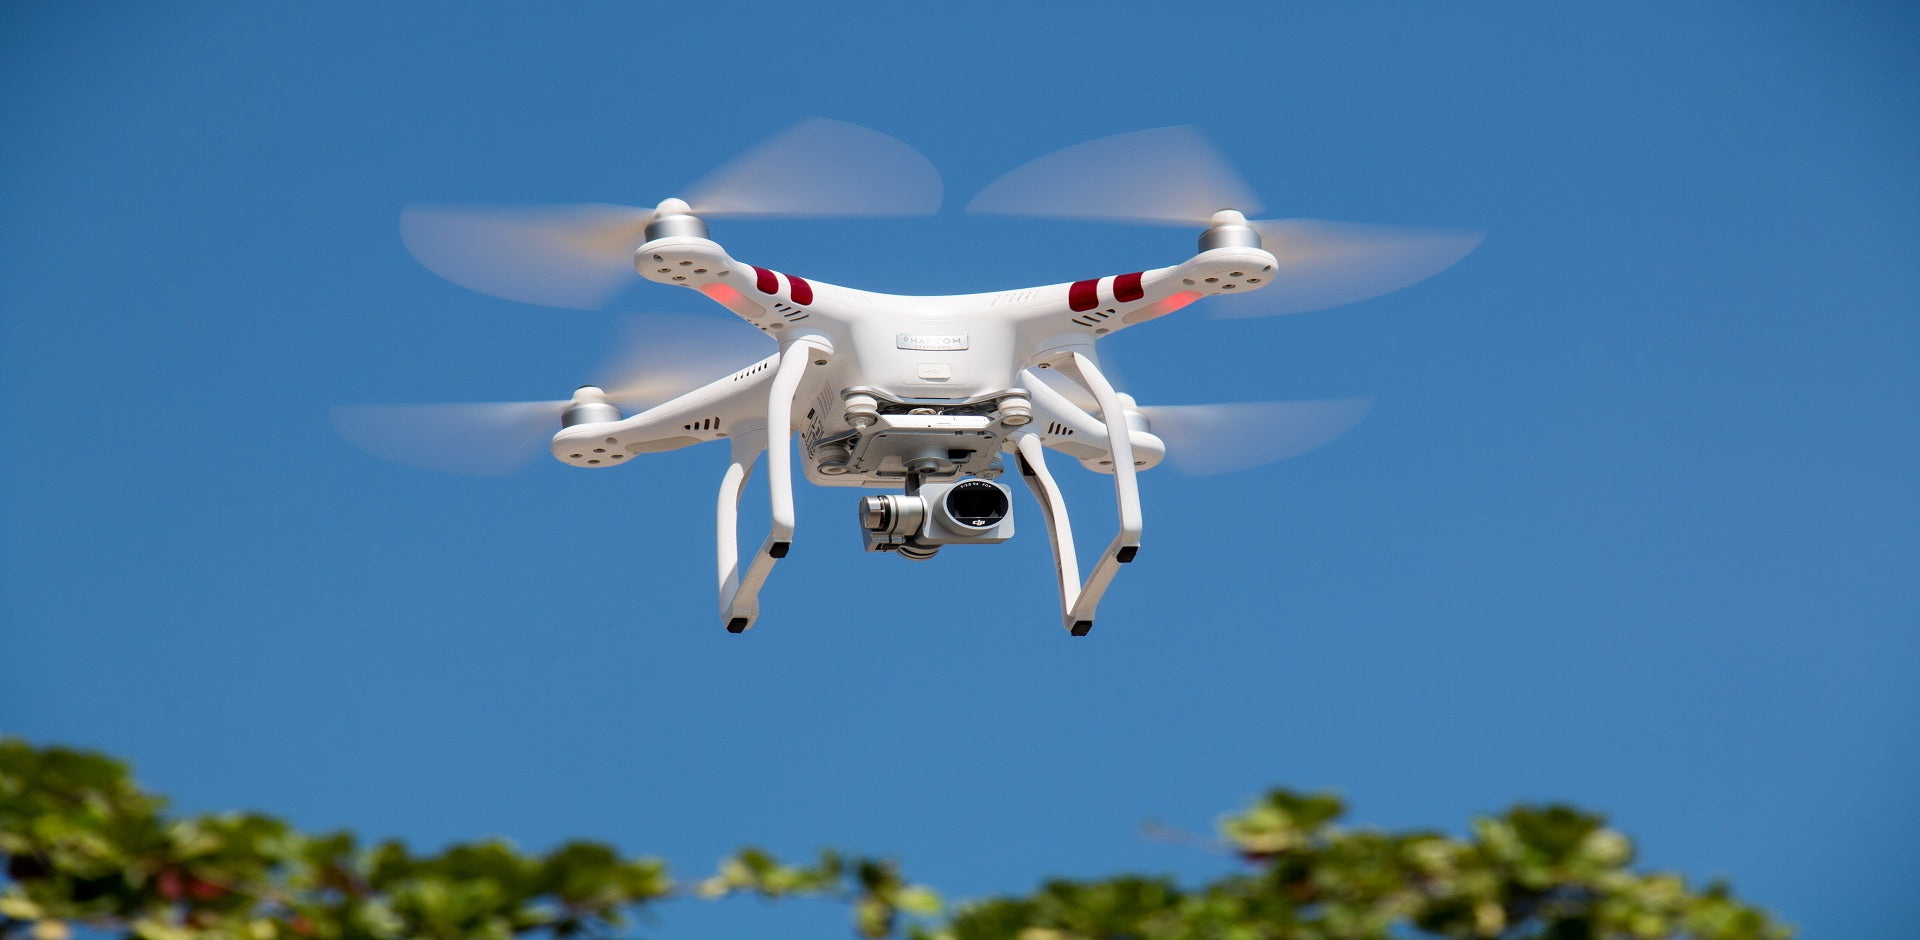 DRONE PAYLOADS AT INTERDRONE 2020 - KEEP YOUR SMILE WITH DRONE